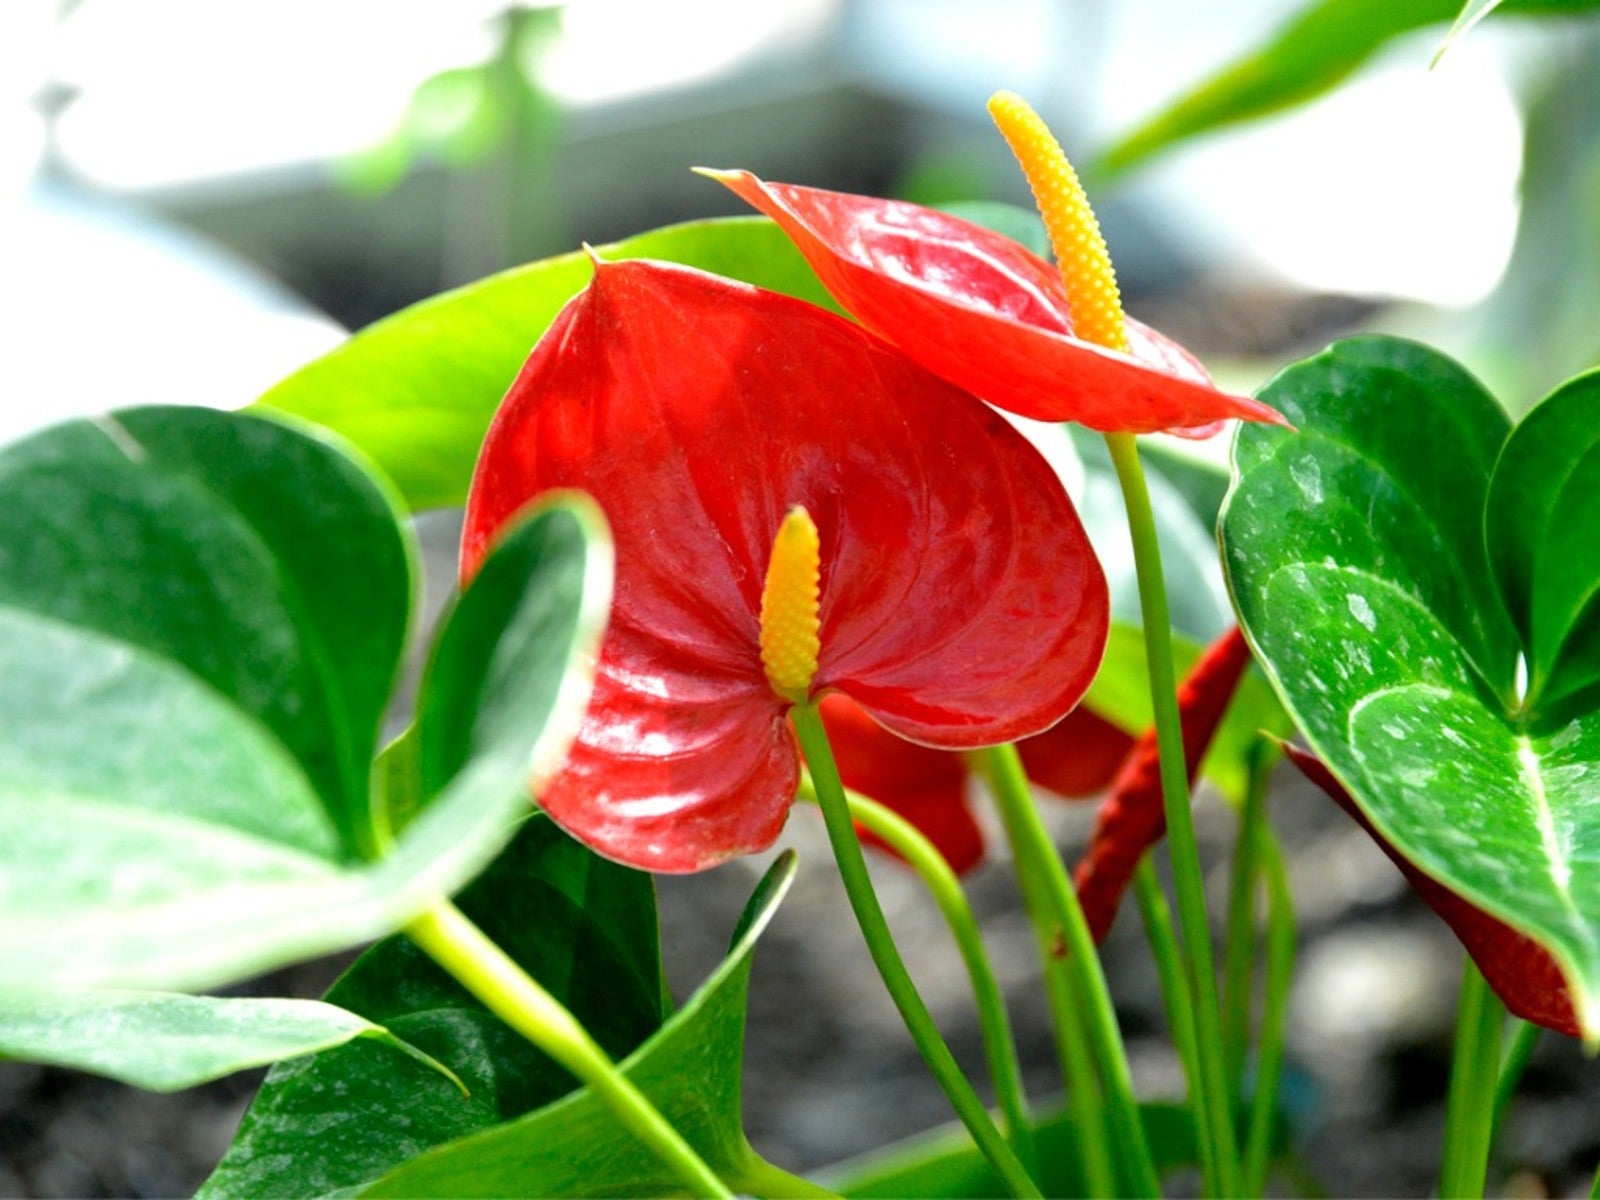 Anthurium Care Guide - Grow Anthurium As A Houseplant | Gardening Know How